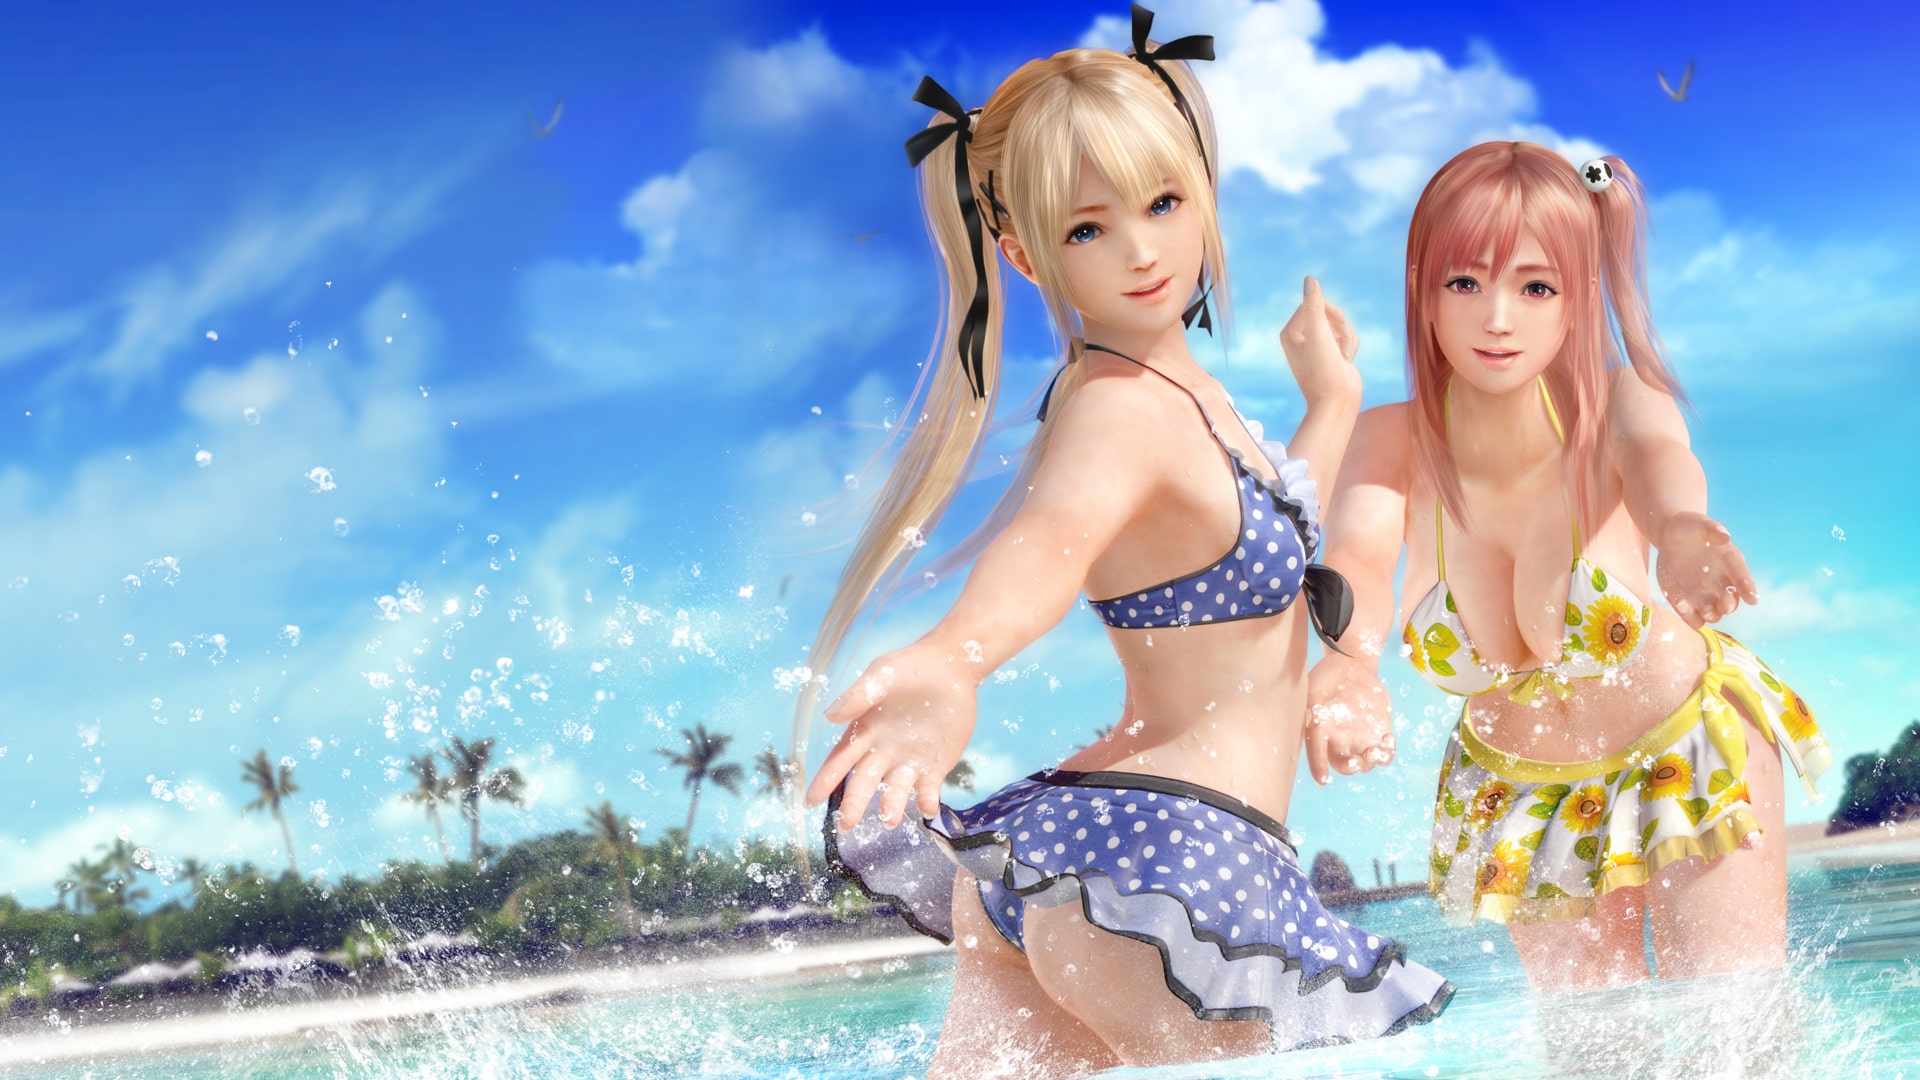 DEAD OR ALIVE Xtreme 3 Fortune ＆ VR Passport (English/Chinese/Korean Ver.)